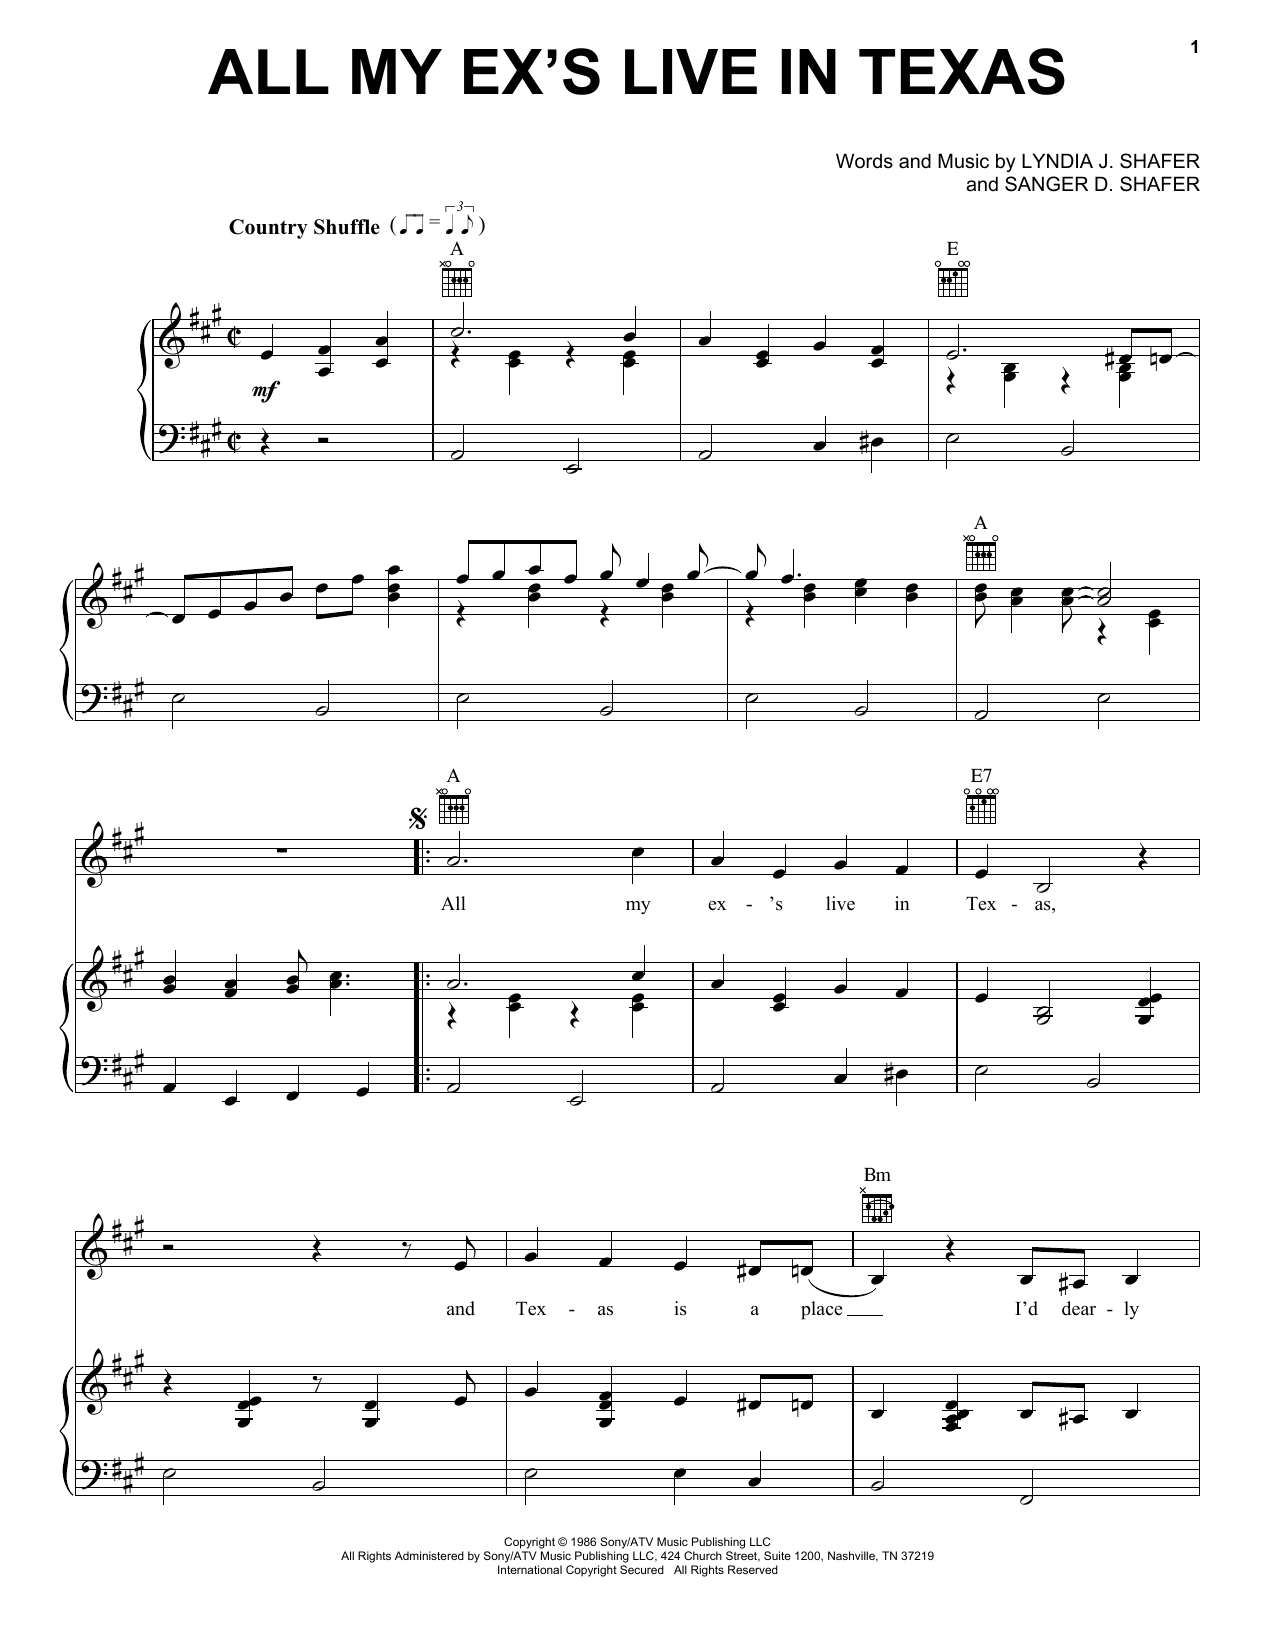 All My Ex's Live In Texas sheet music